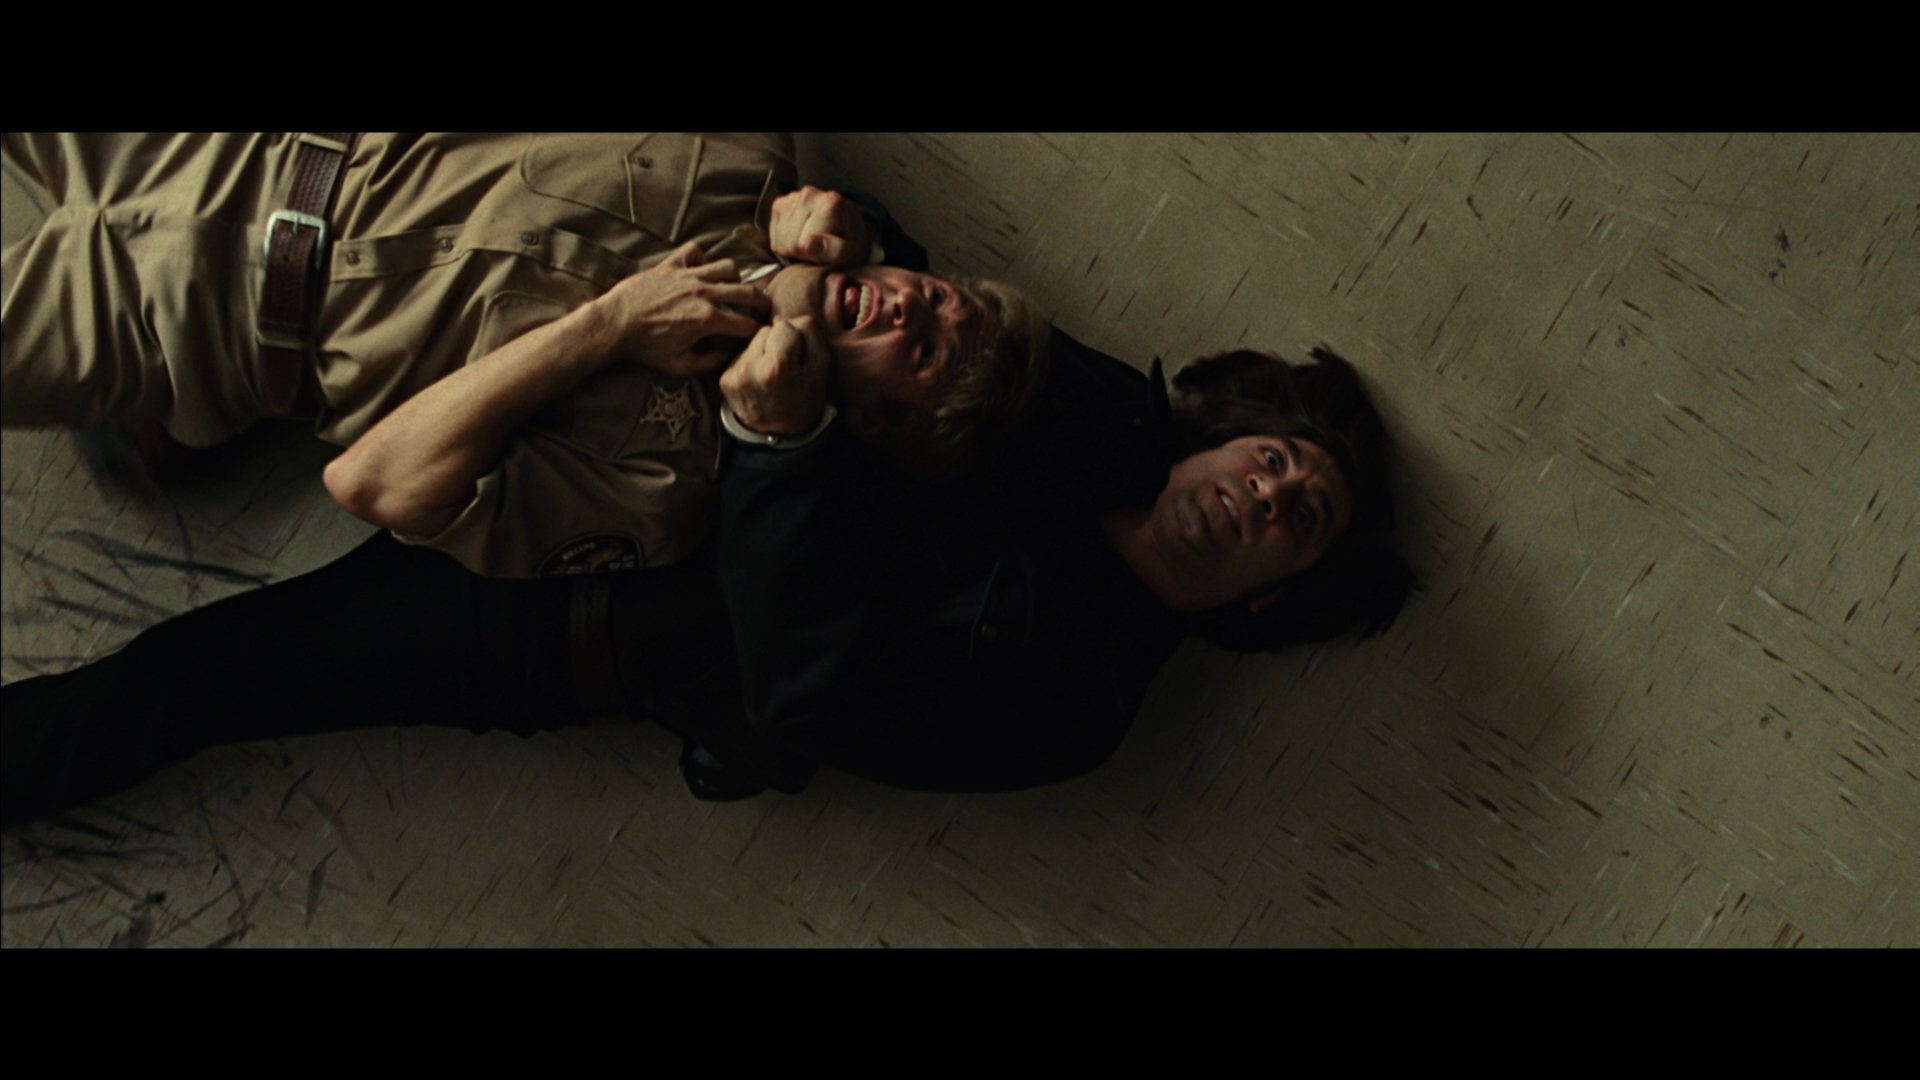  - JPEG - Image for No Country for Old Men